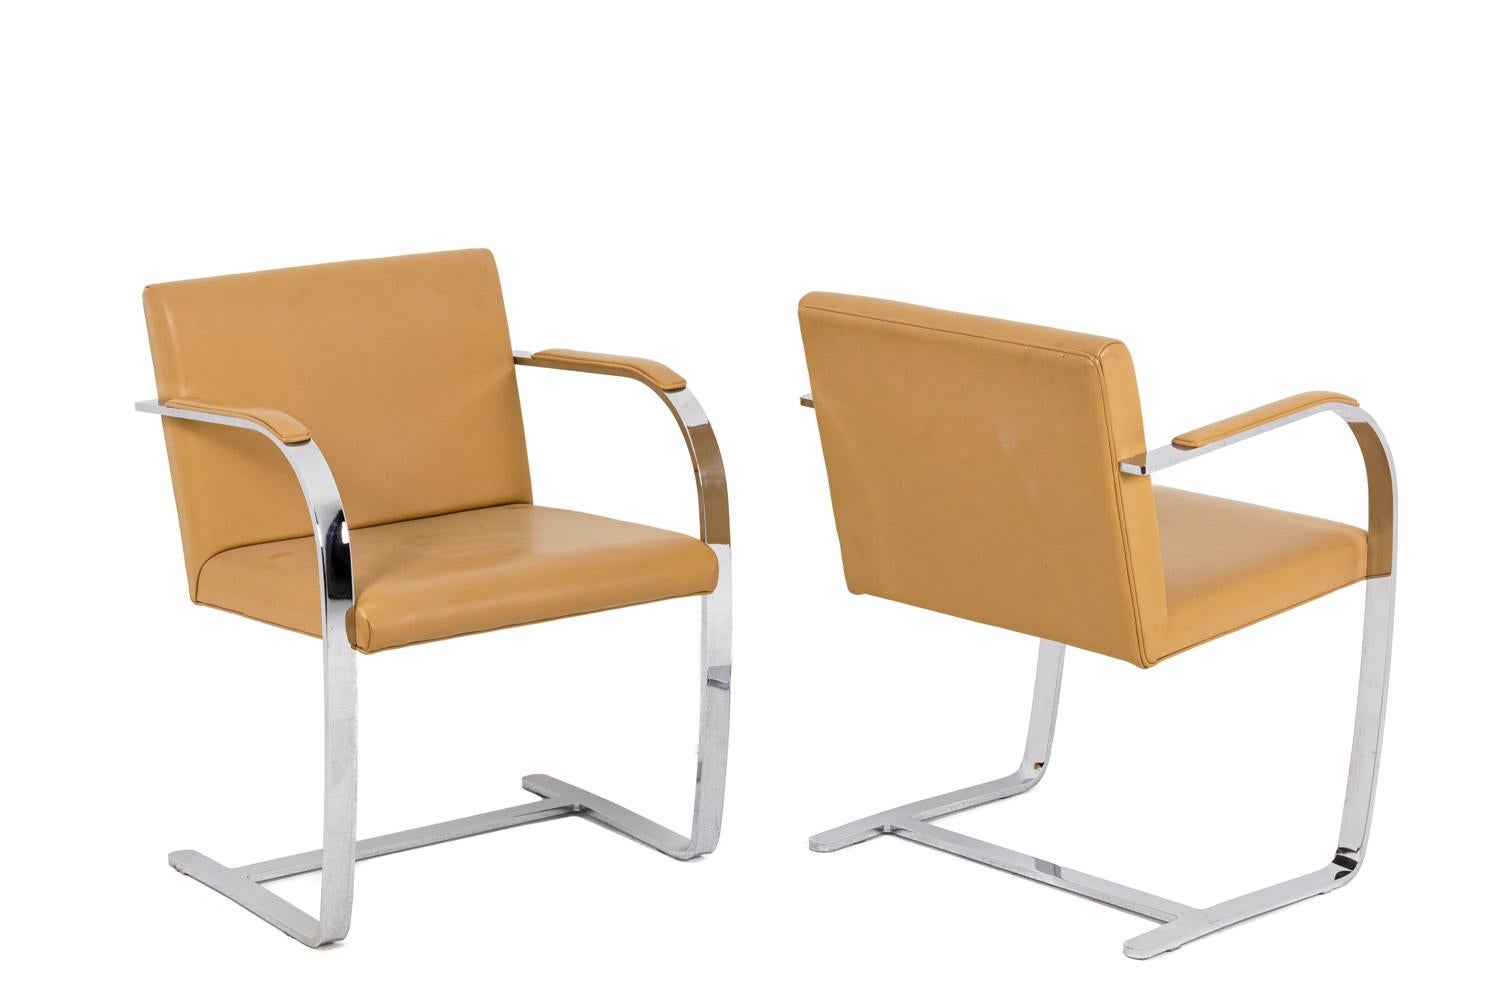 Ludwig Mies van der Rohe for Knoll, attributed to

Series of four armchairs 